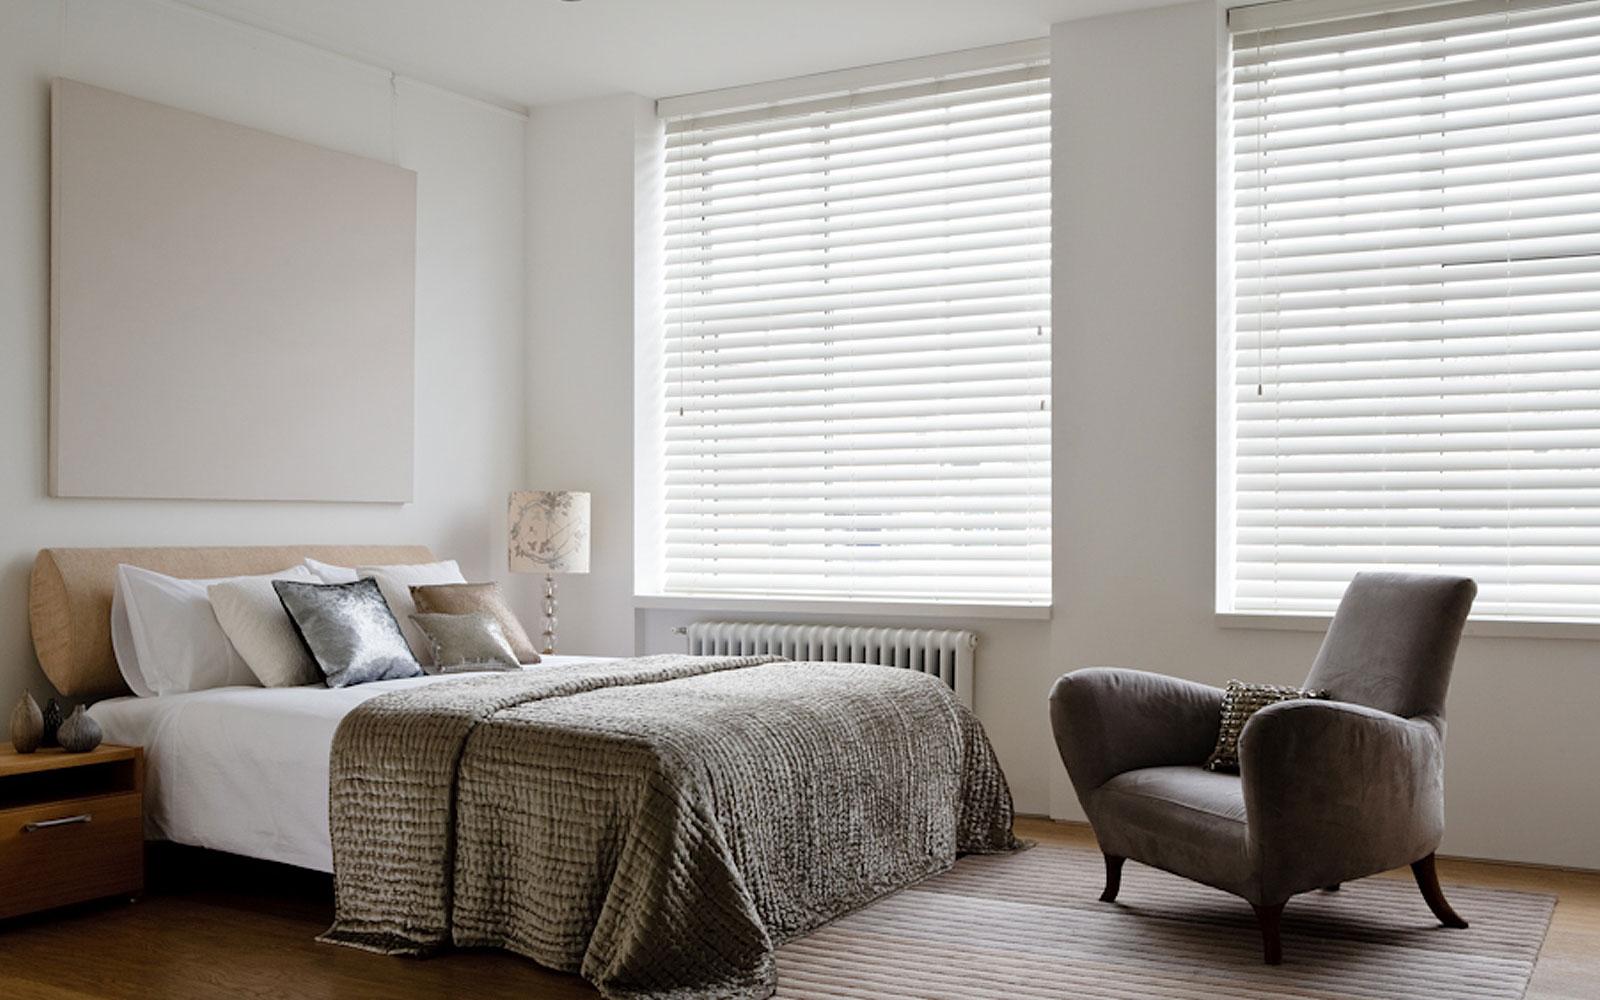 White horizontal blinds in a bedroom with a gray bedspread